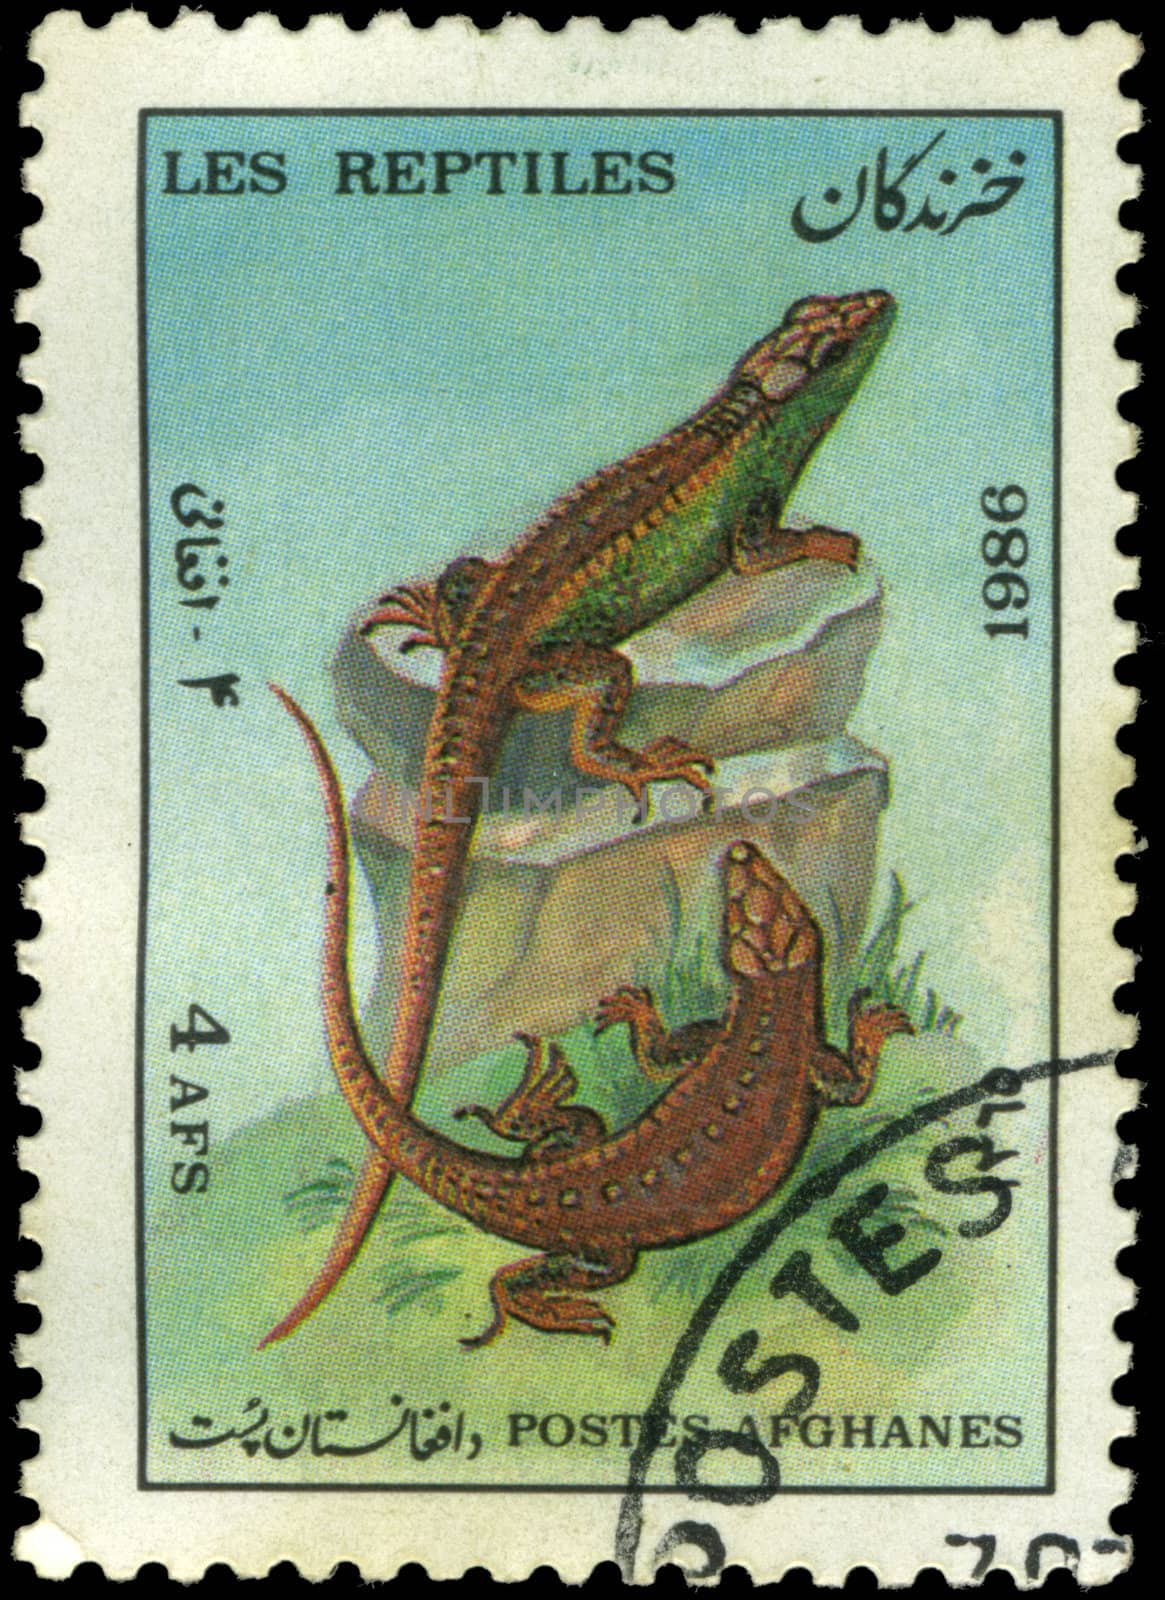 Afghan Stamp 1986  by Nemo1024